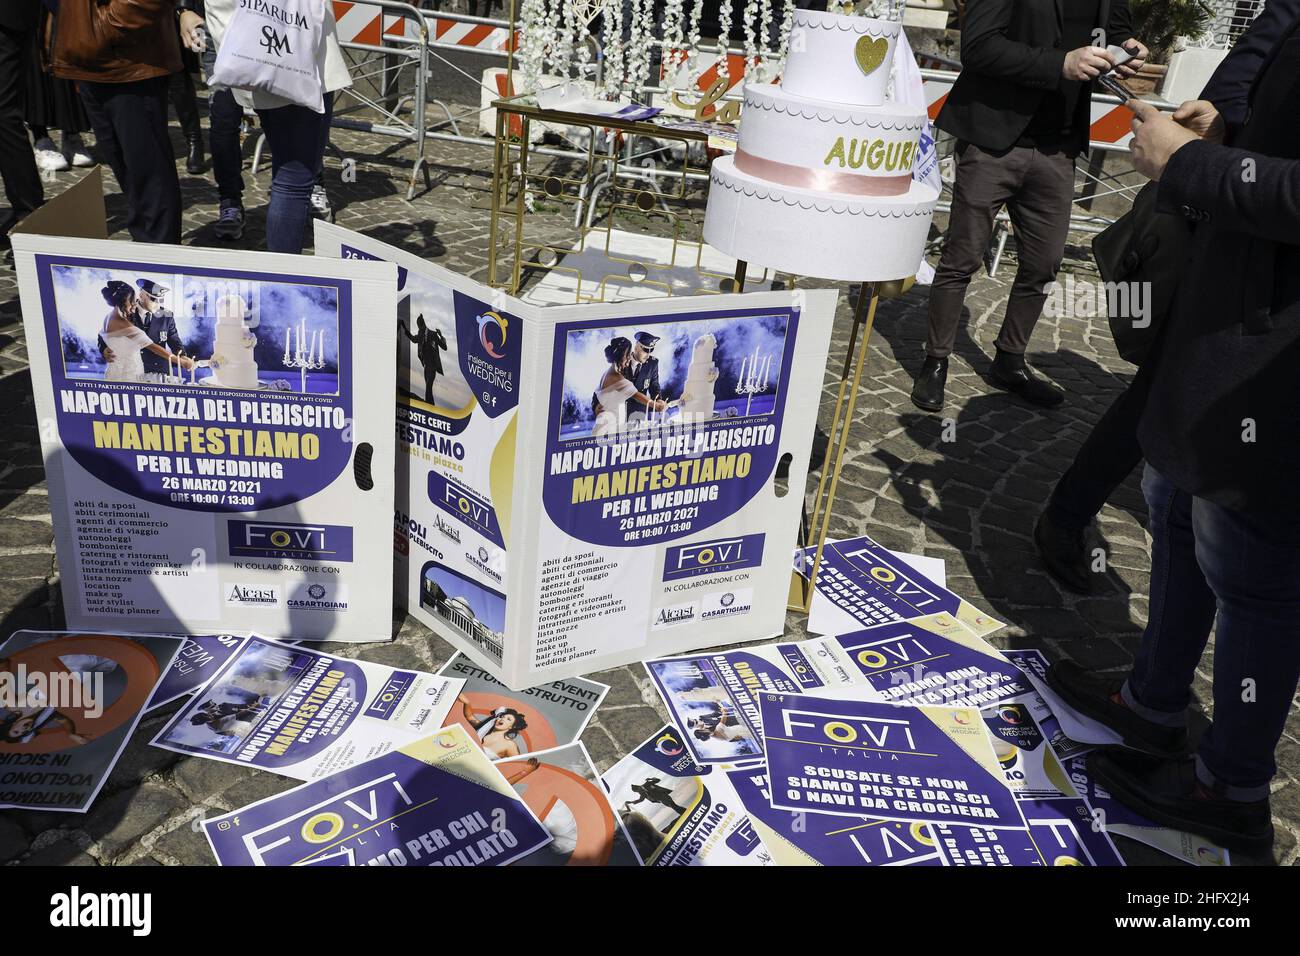 LaPresse - Fabio Sasso 26/03/2021 - Naples (Italy) News Protest of Wedding  workers demanding protocols to safely restart In the picture: a moment of  the protest Stock Photo - Alamy